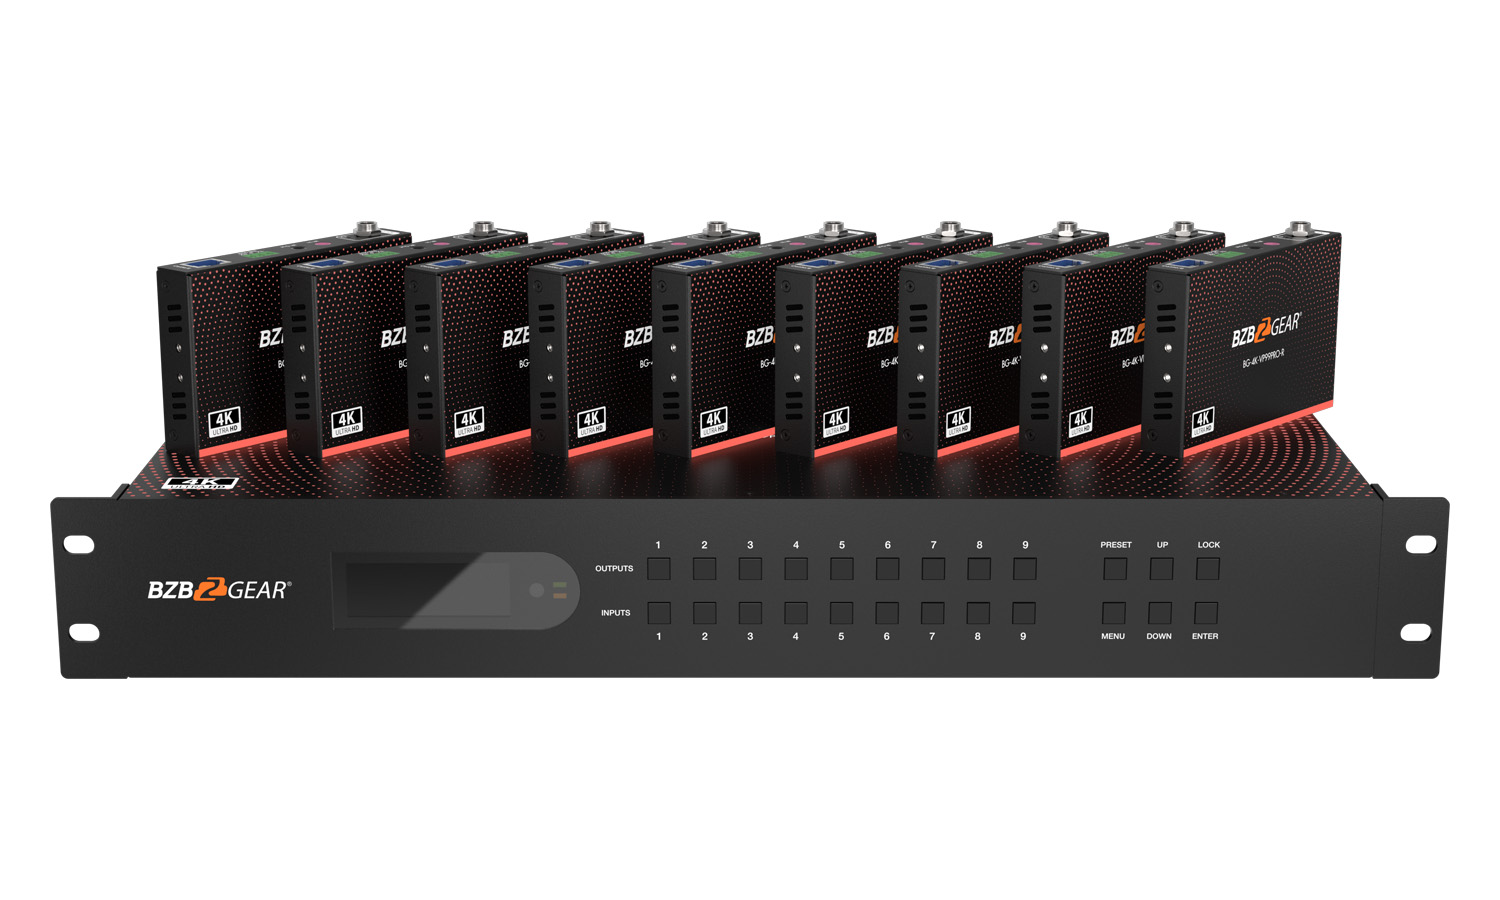 BG-4K-VP99PRO 9x9 4K UHD Seamless HDMI Matrix Switcher/Video Wall Processor/Multiviewer over Cat5/6/7 with 9 Receivers Kit by BZBGEAR